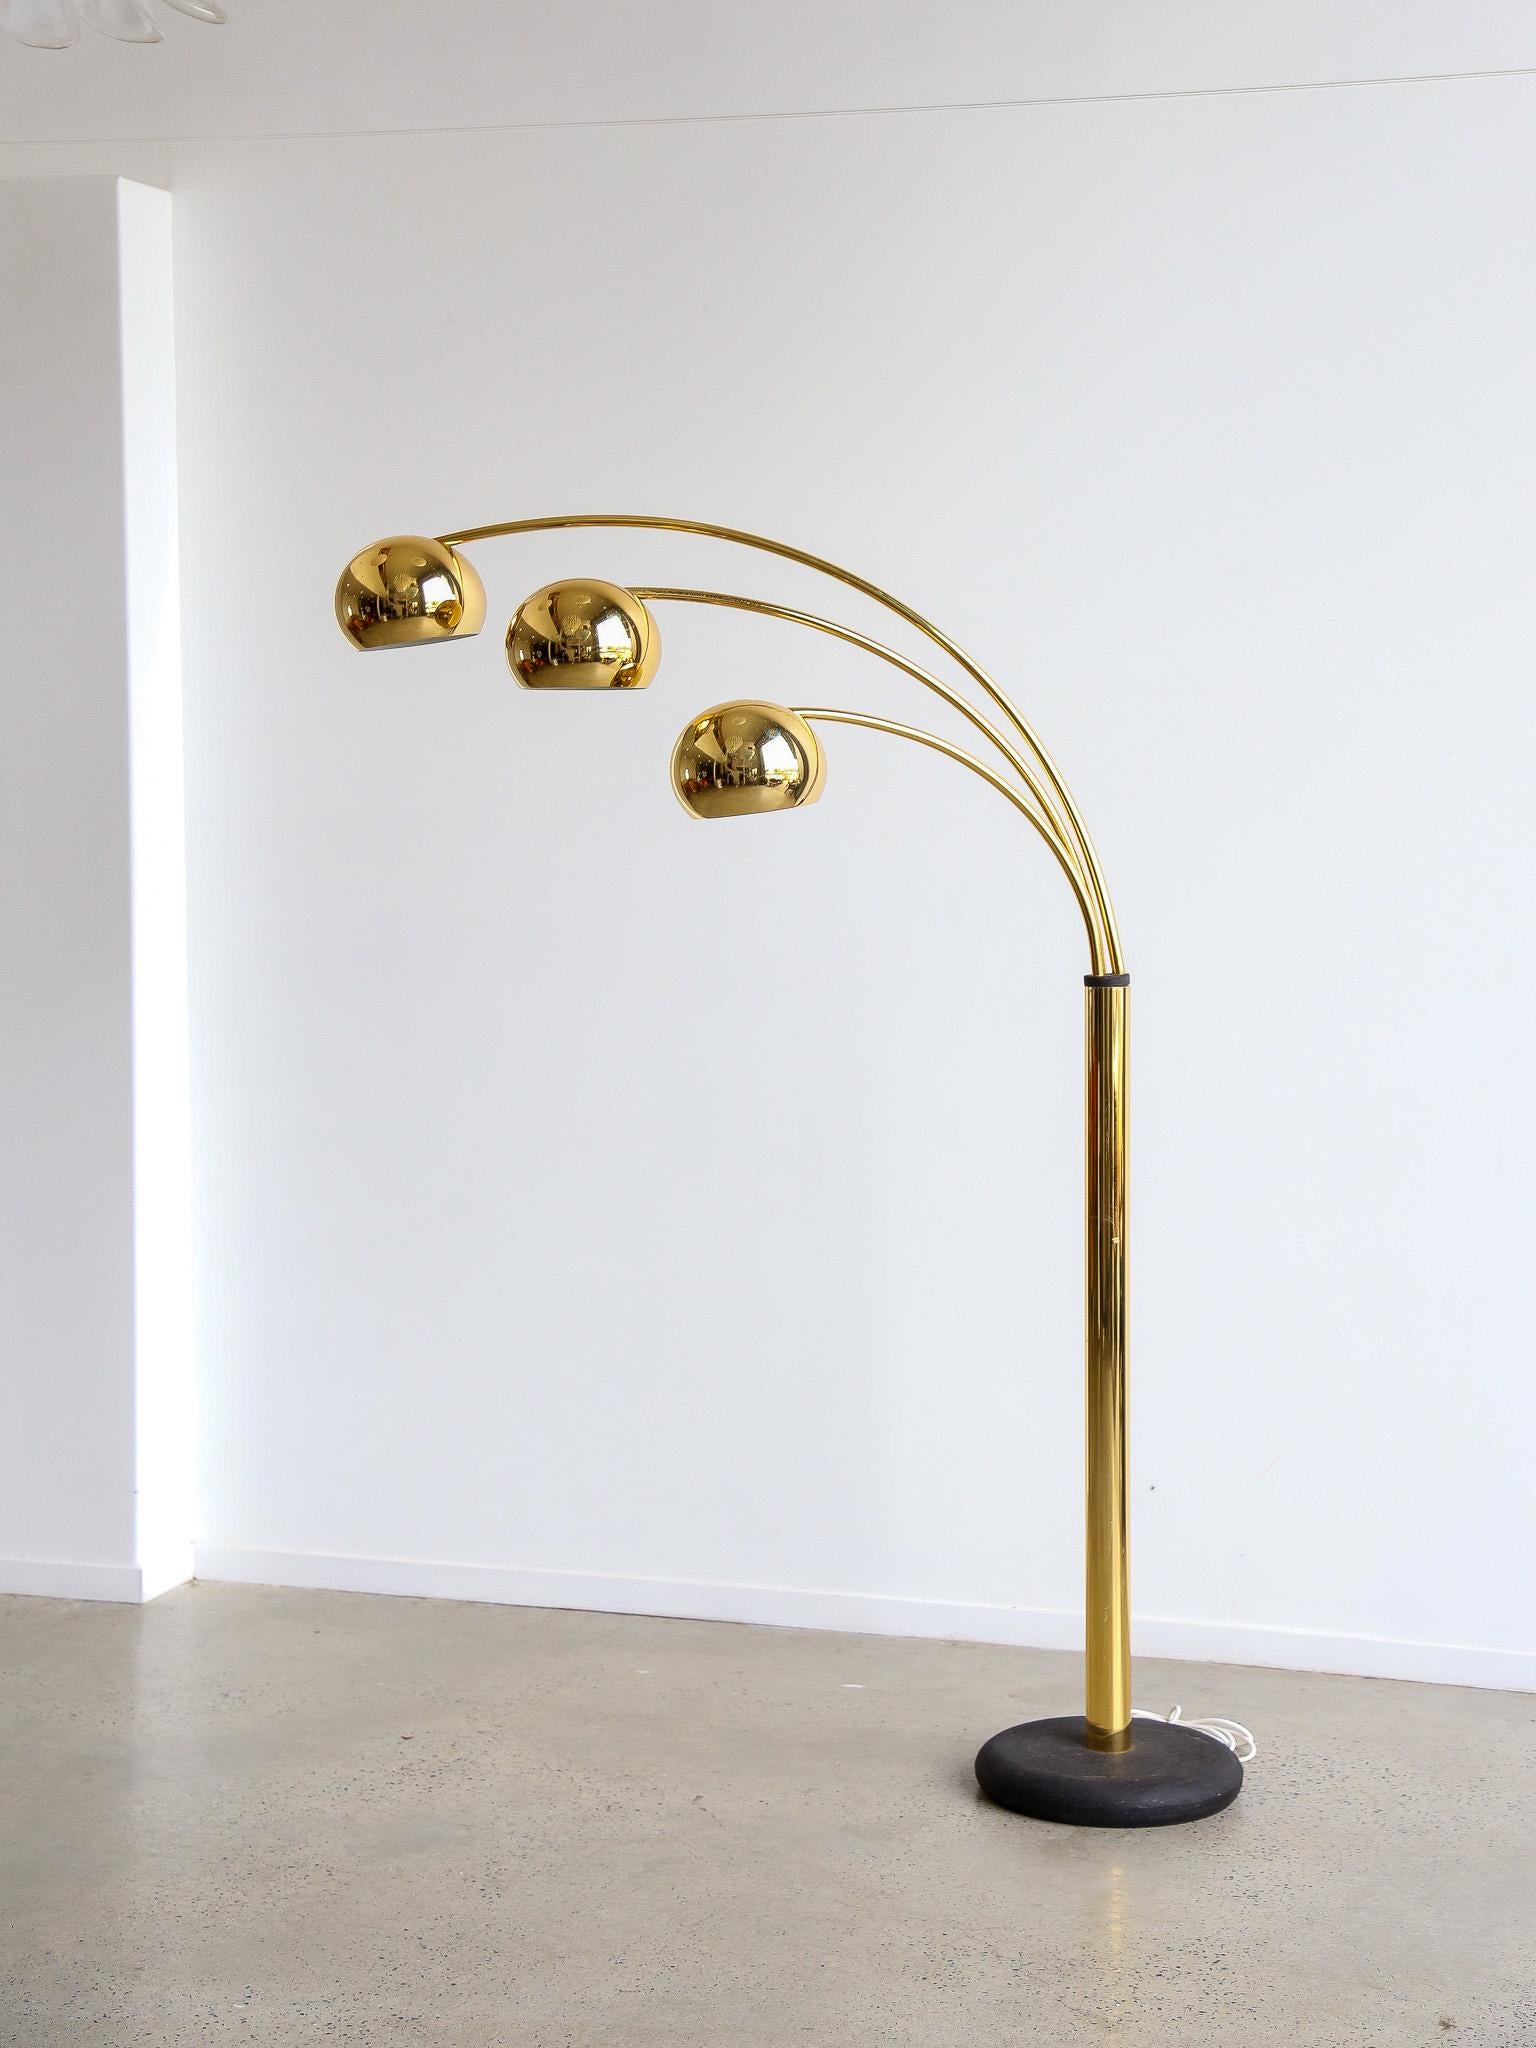 Rare and iconic floor lamp with three adjustable spheres in gilded metal and painted cast iron base by Goffredo Reggiani, Italy, 1970s.

Goffredo Reggiani was an Italian industrial designer and the founder of the lighting company Reggiani